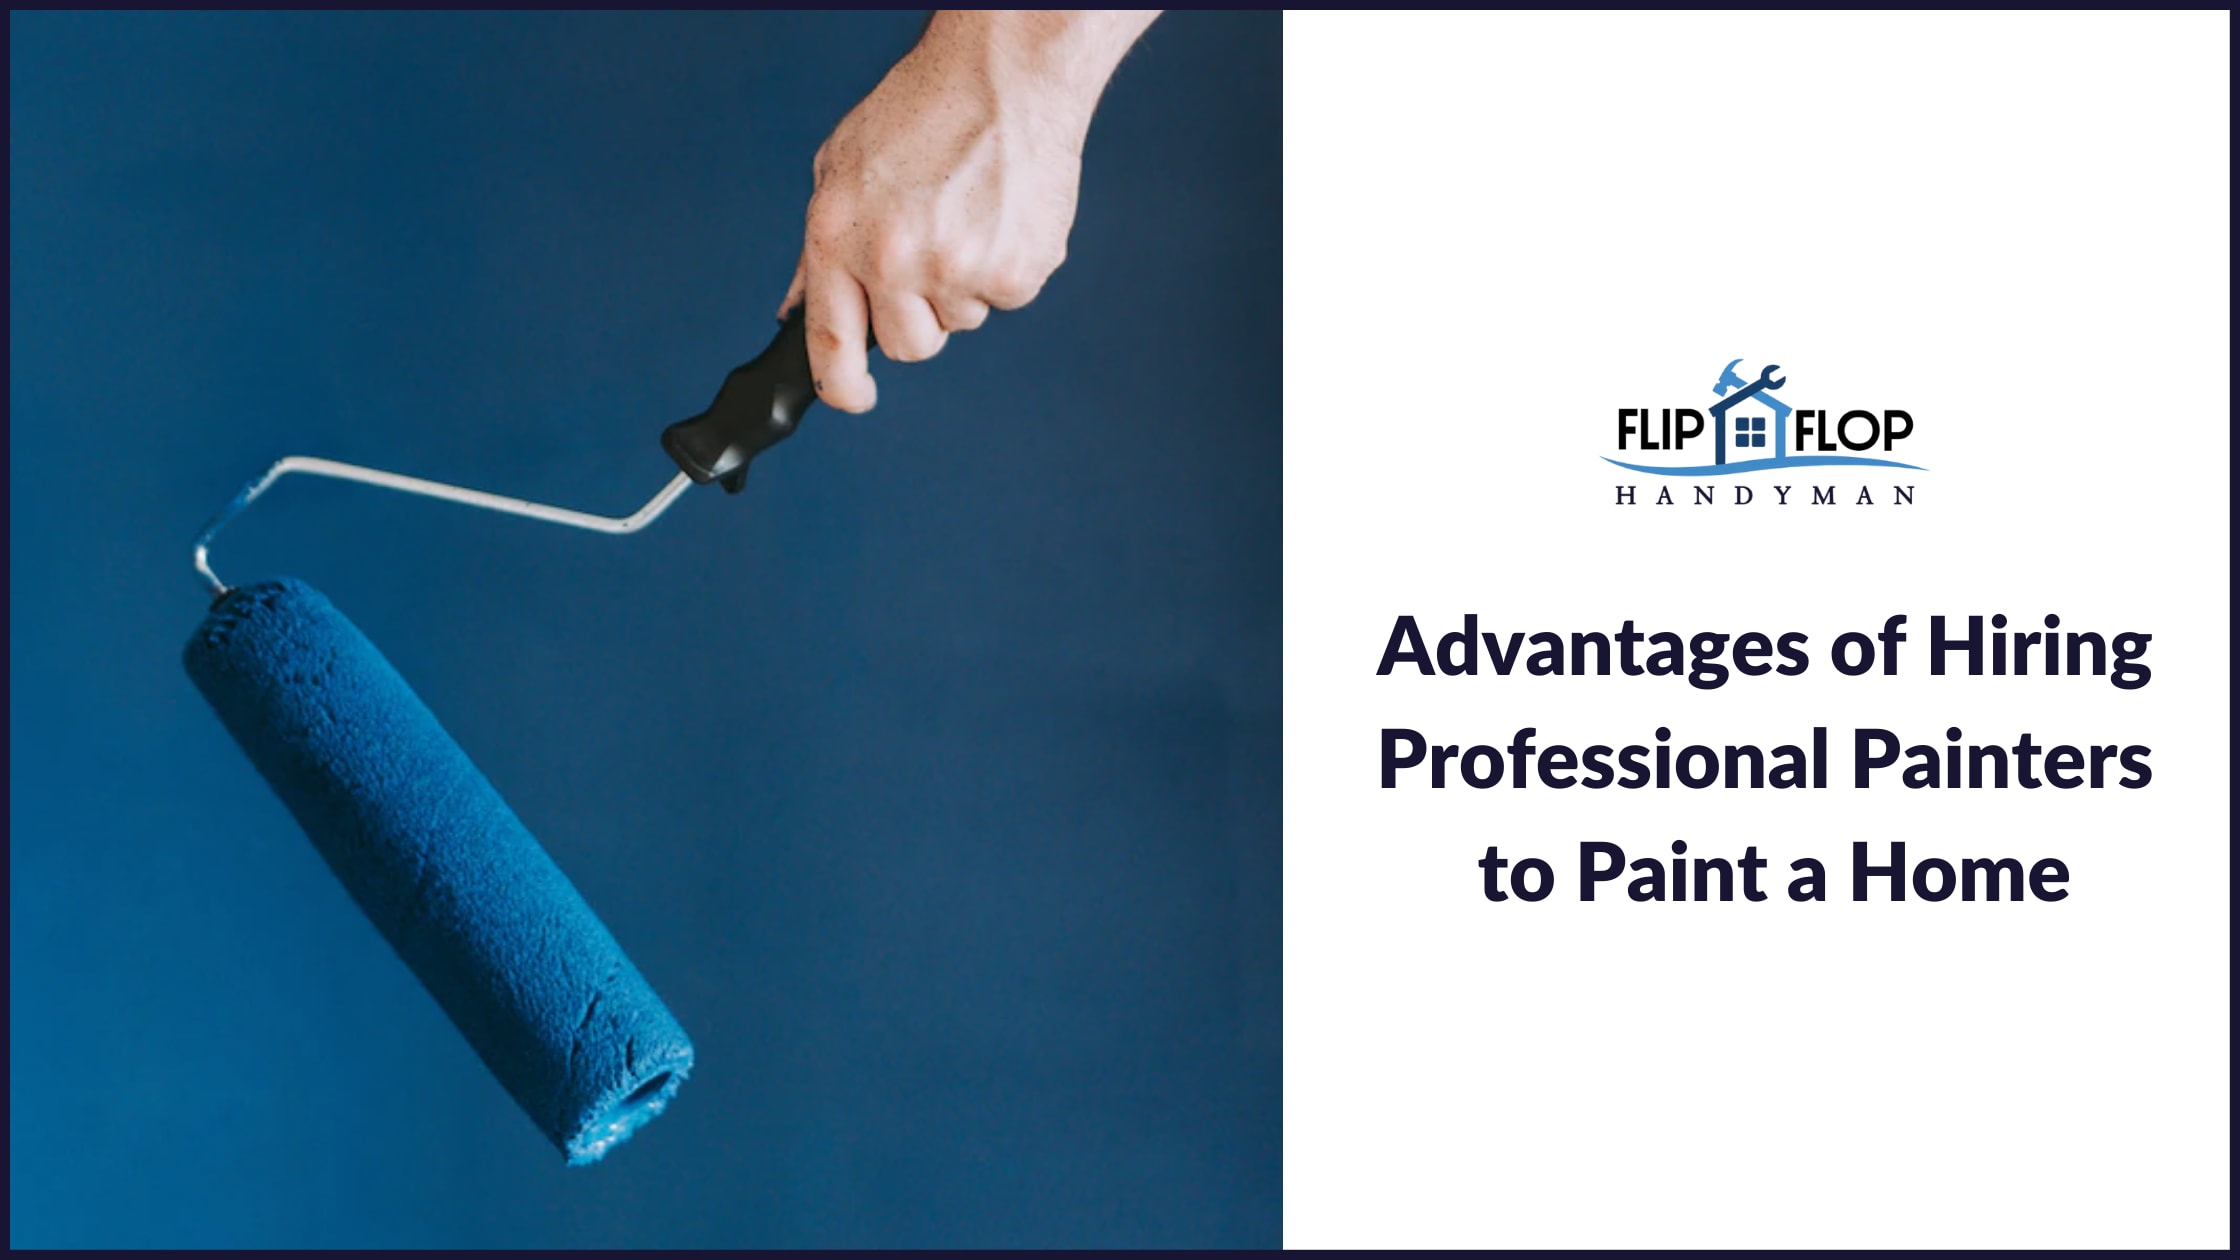 Benefits to Hire Professional Painters to Paint Home - Flip Flop Handyman